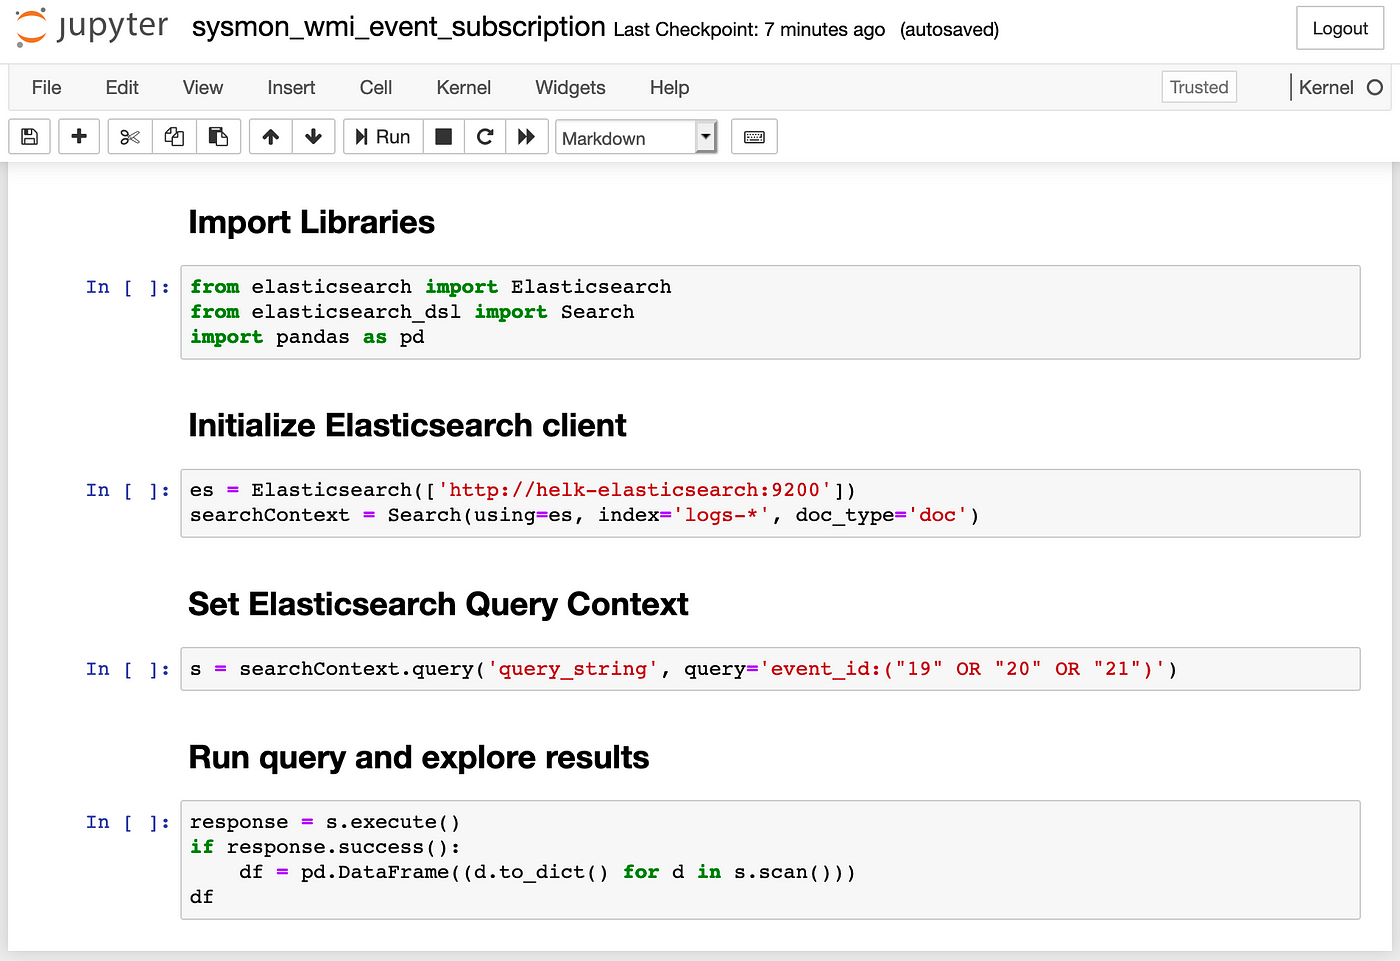 GitHub - elastic/elasticsearch-labs: Notebooks & Example Apps for